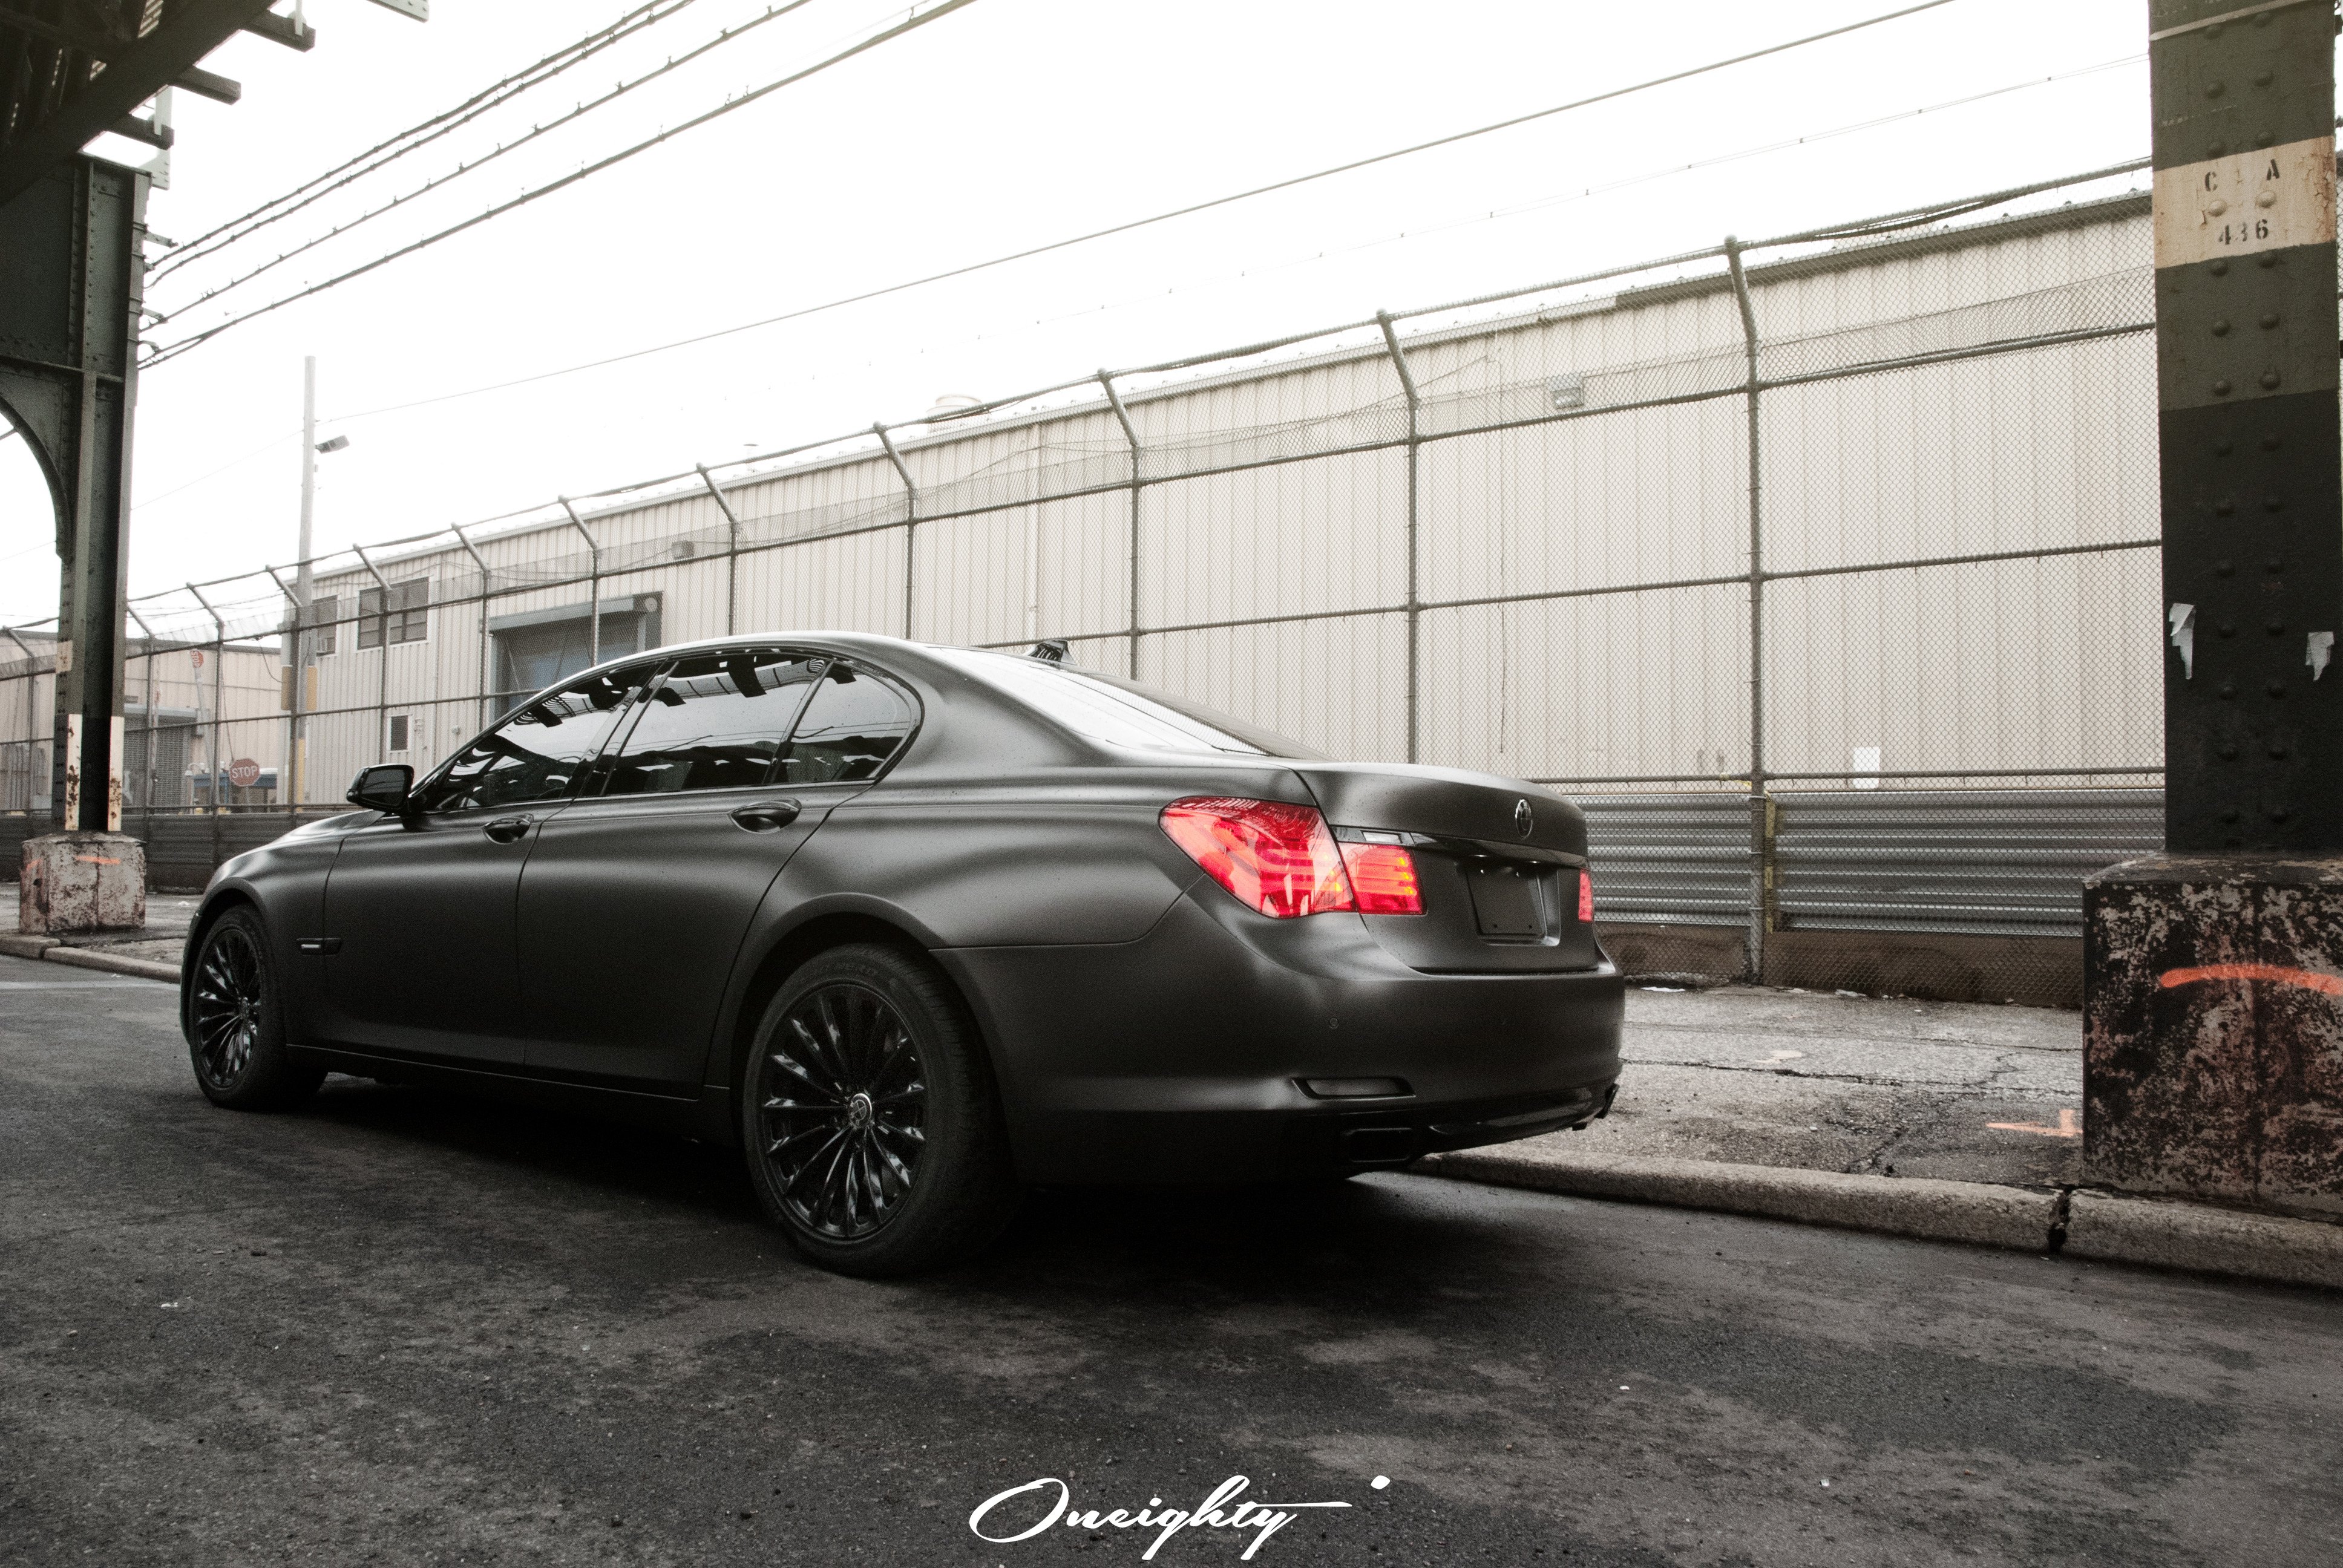 Aftermarket Rear Diffuser on Gray BMW 7-Series - Photo by ONEighty NYC